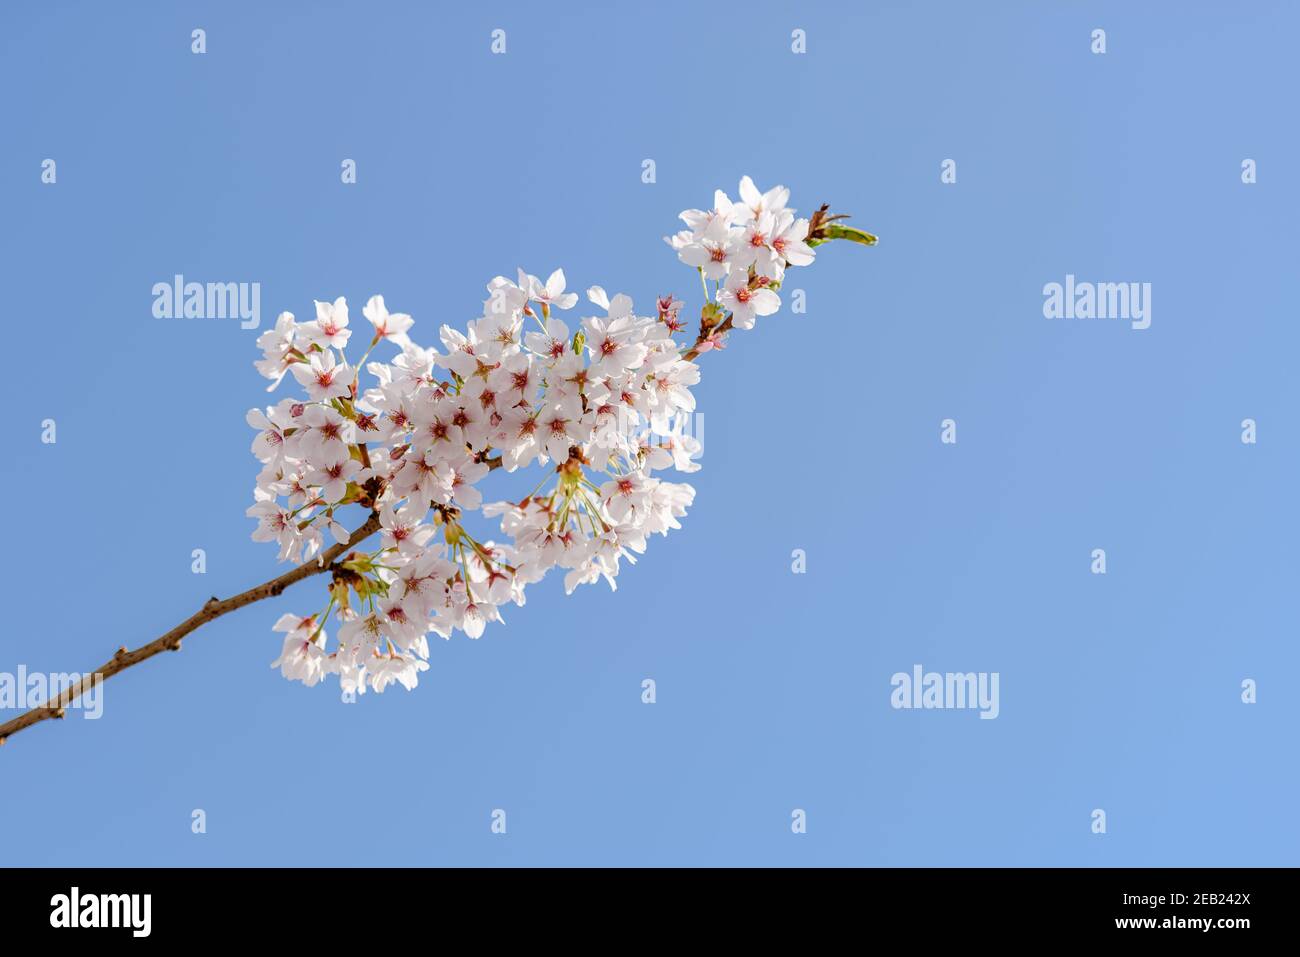 A branch with cherry blossoms against clear blue sky Stock Photo